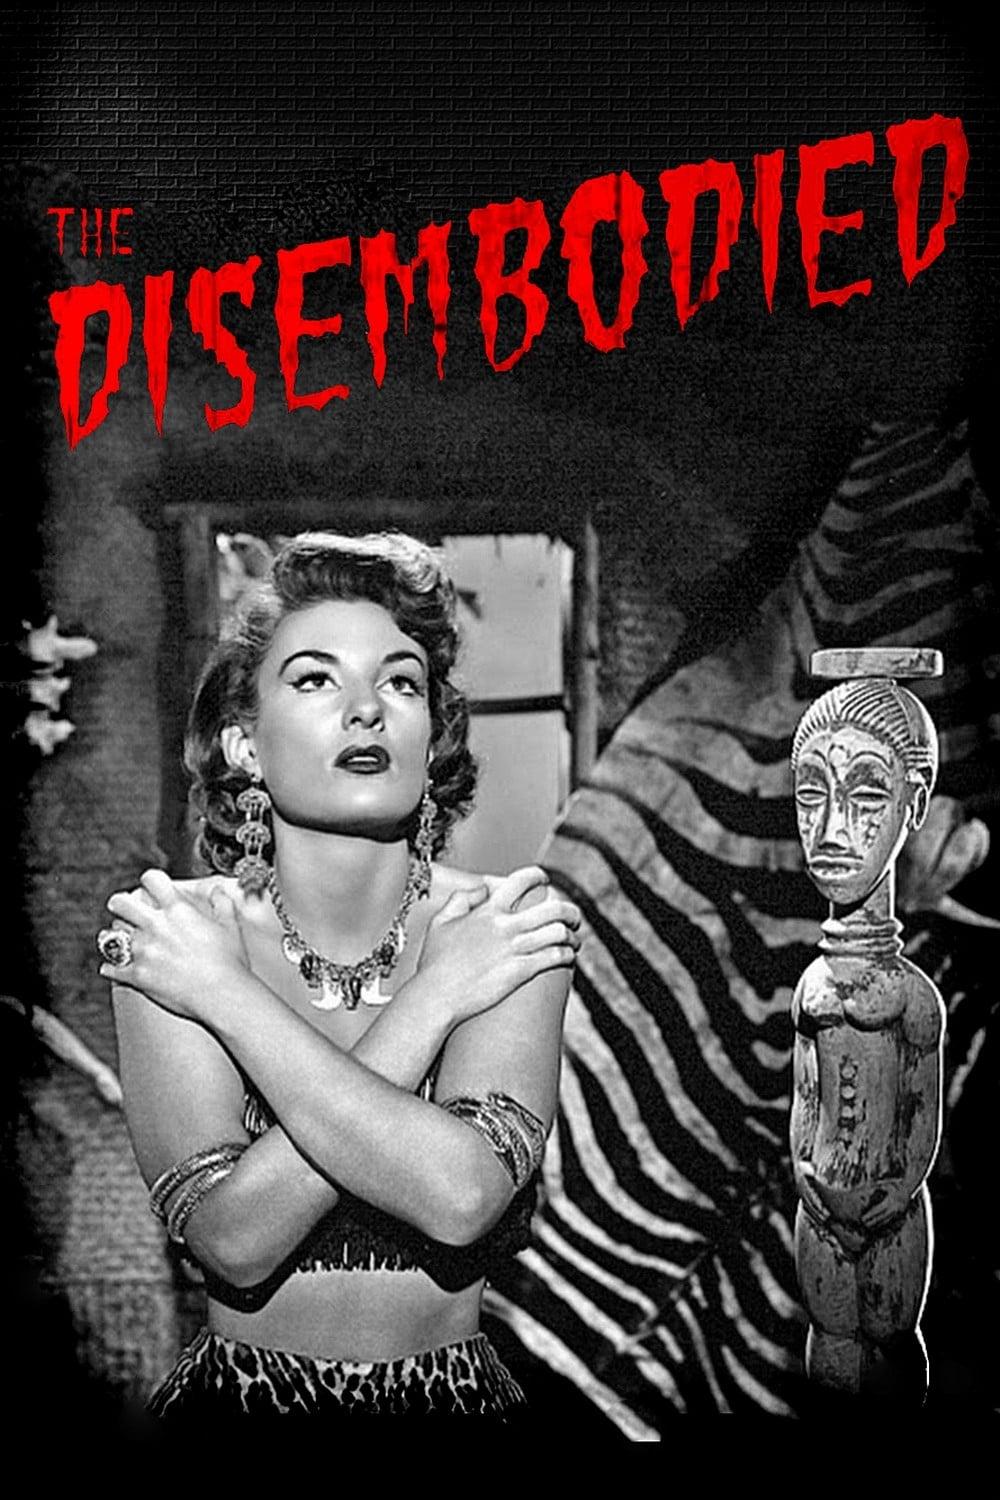 The Disembodied poster